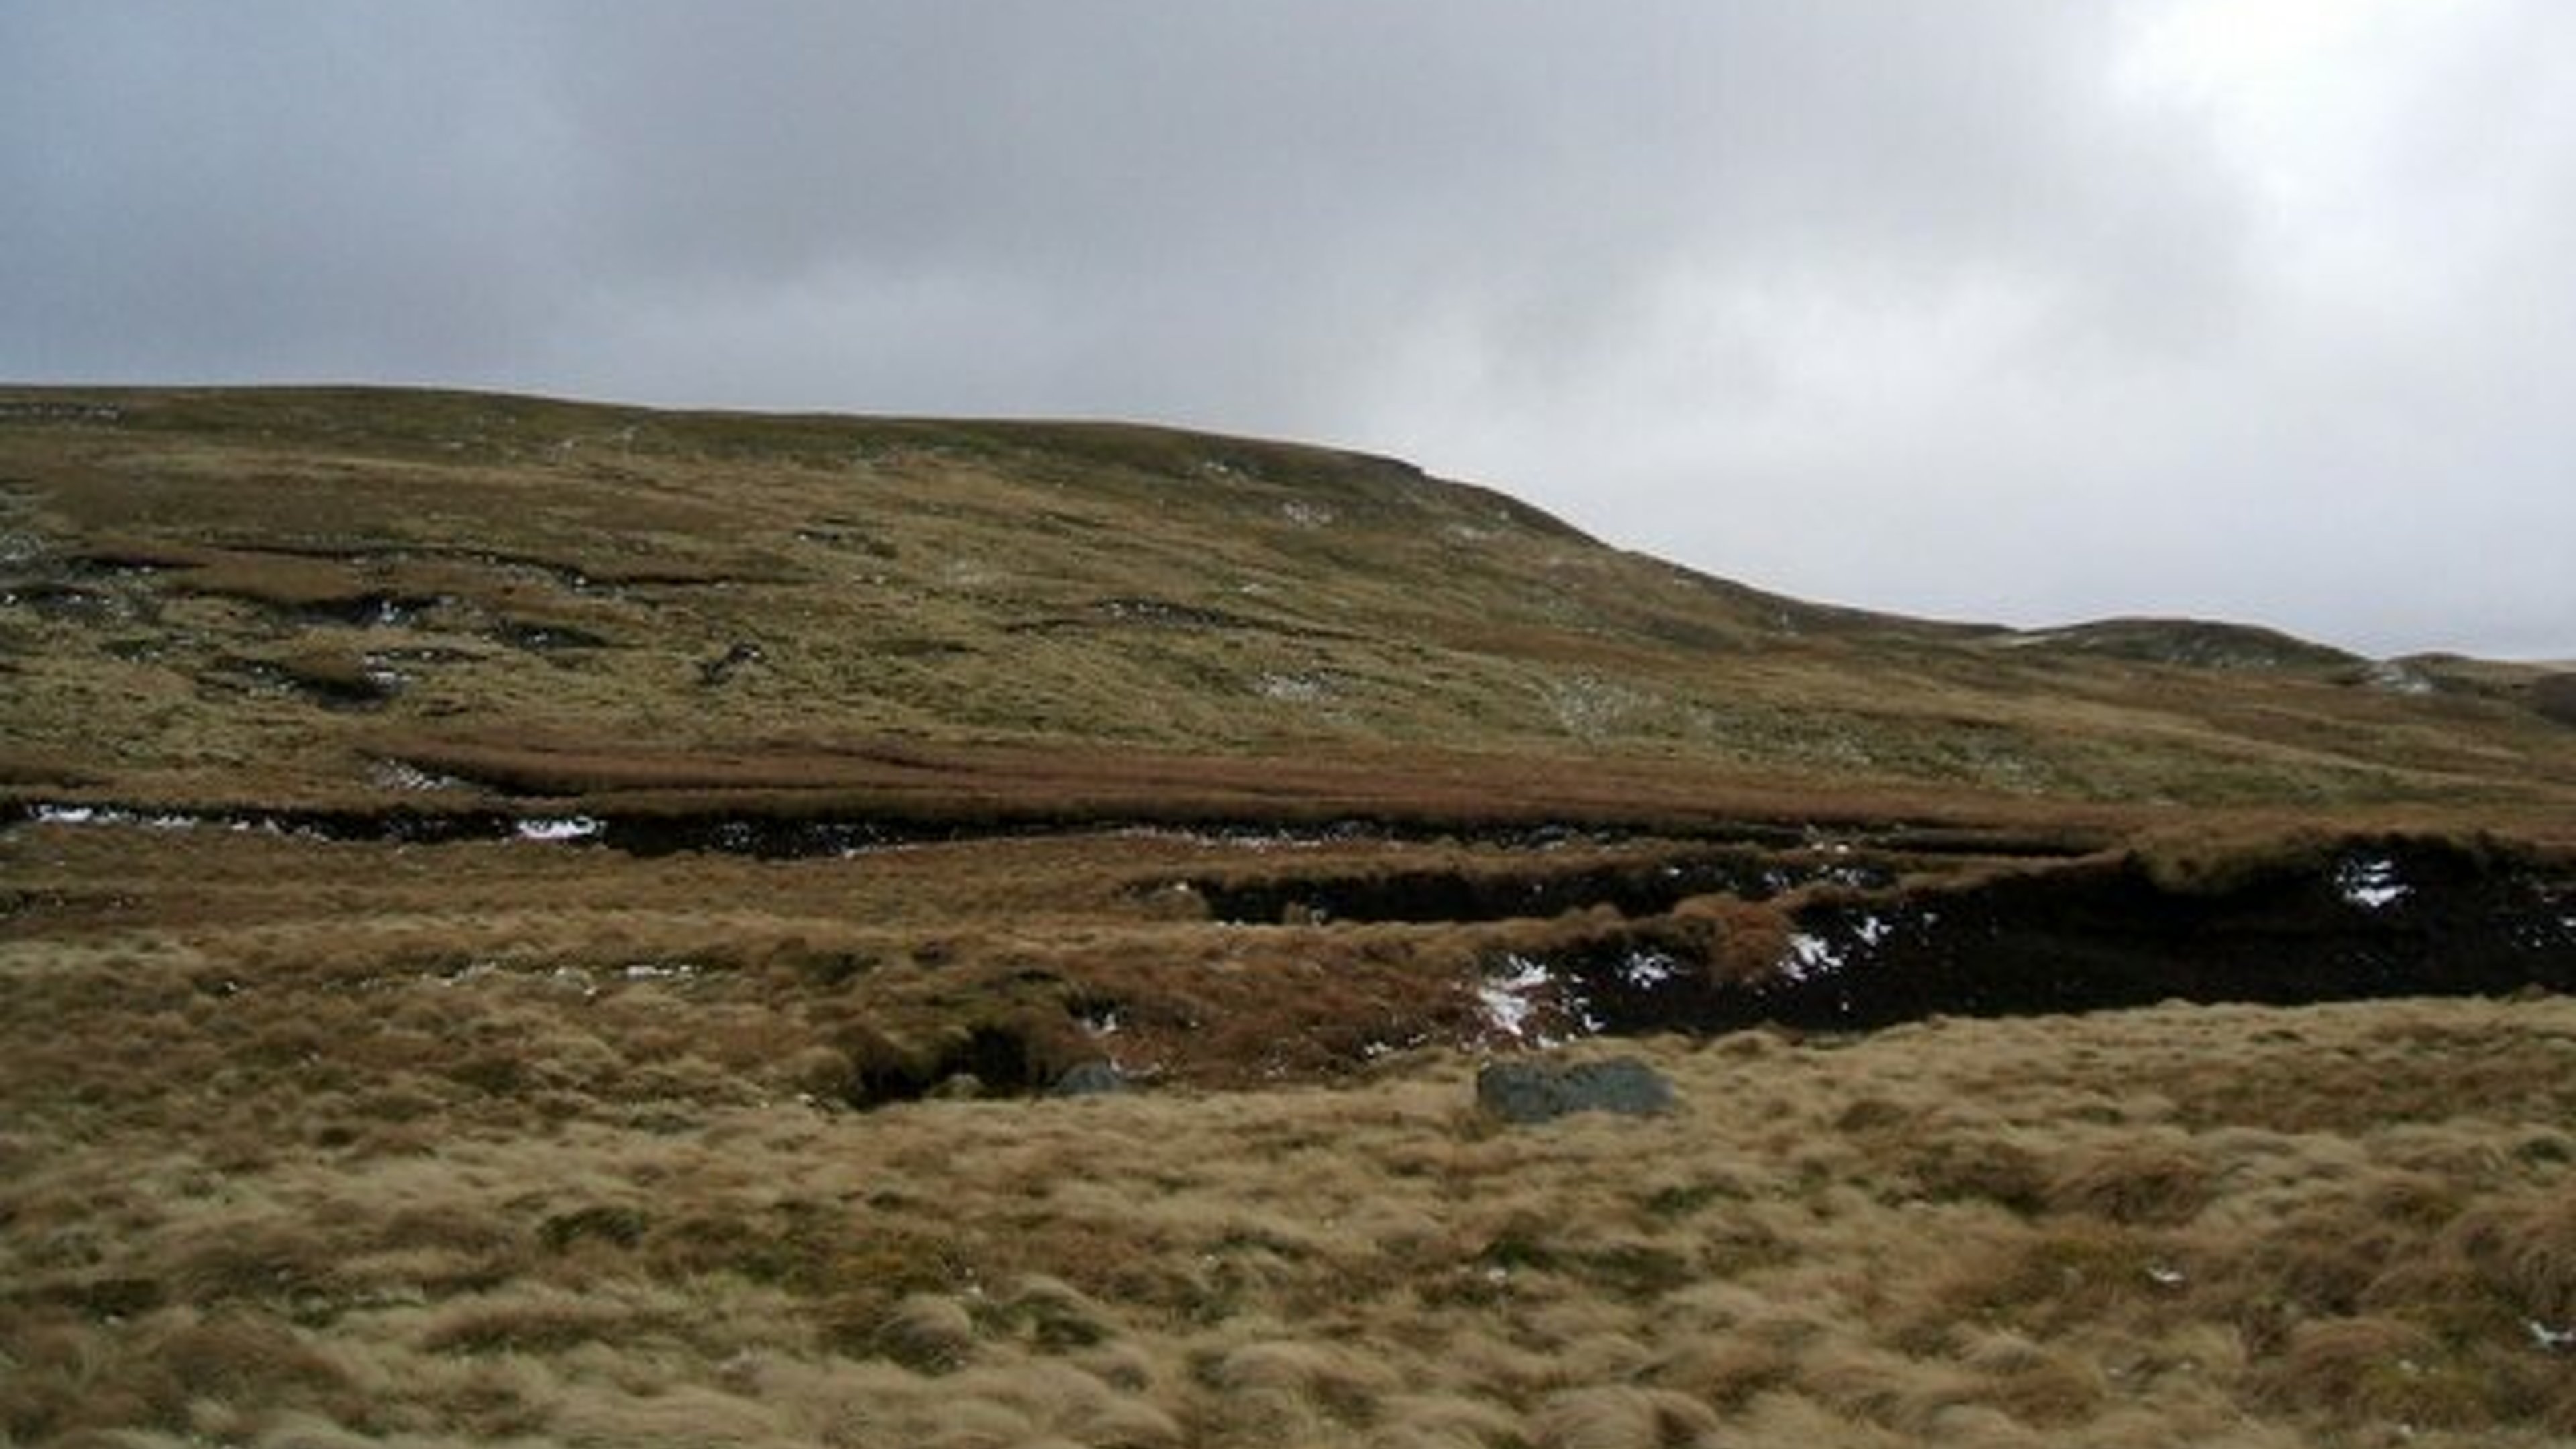 High Seat - Cumbria and North Yorkshire 3 Peaks Hiking Challenge